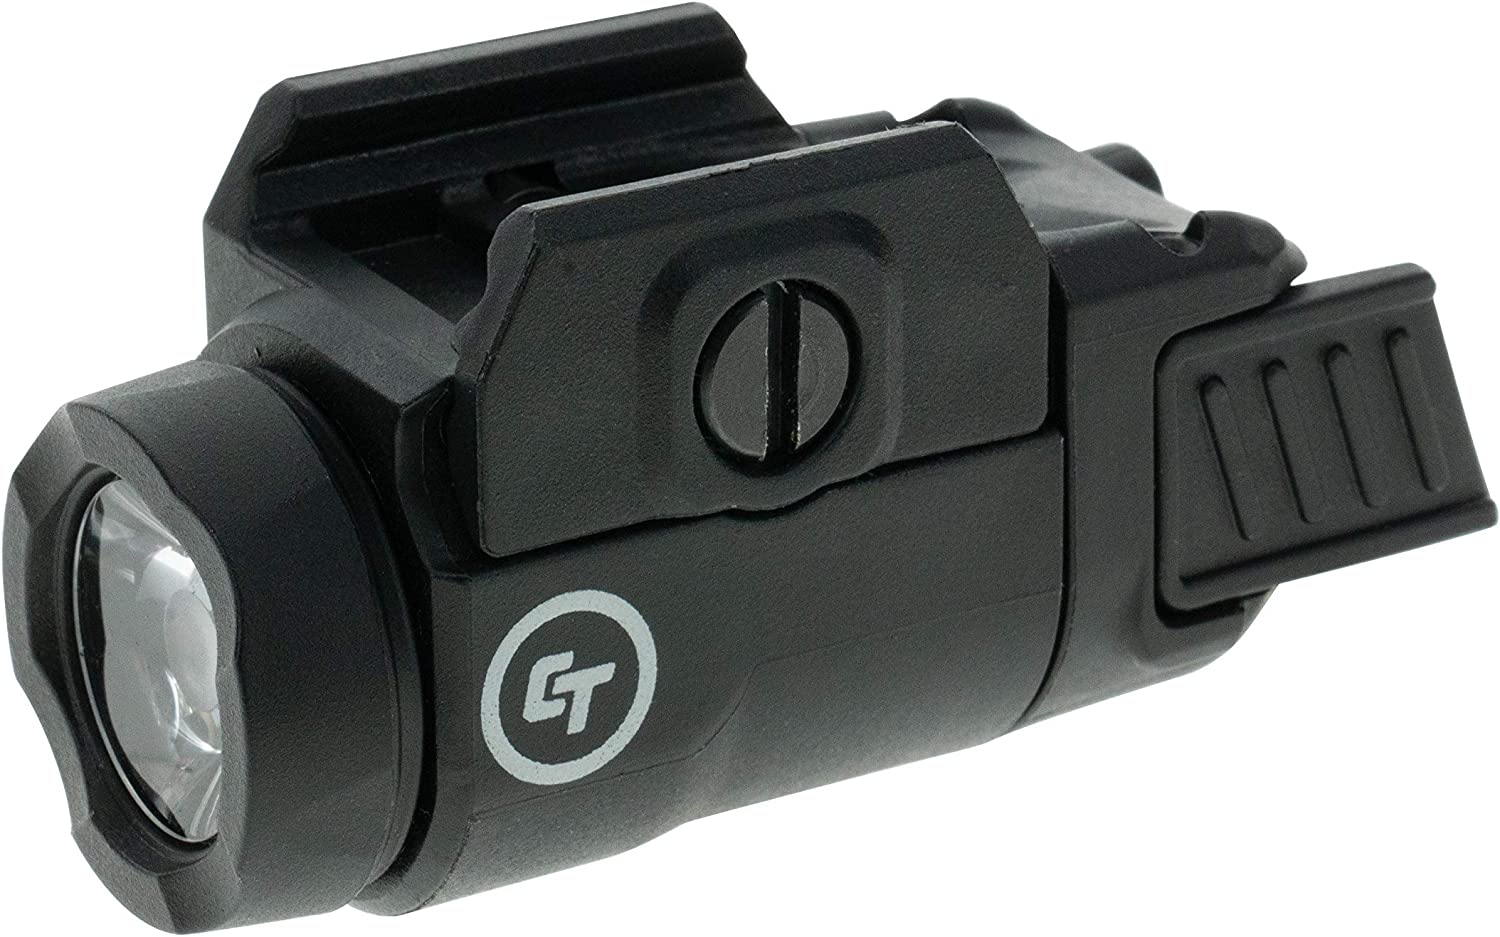 Crimson Trace CMR-209 Rail Master Universal 200 Lumen Weapon Light with Ambidextrous Controls and Pic Rail Mount for Tactical Carry, CCW and Competition